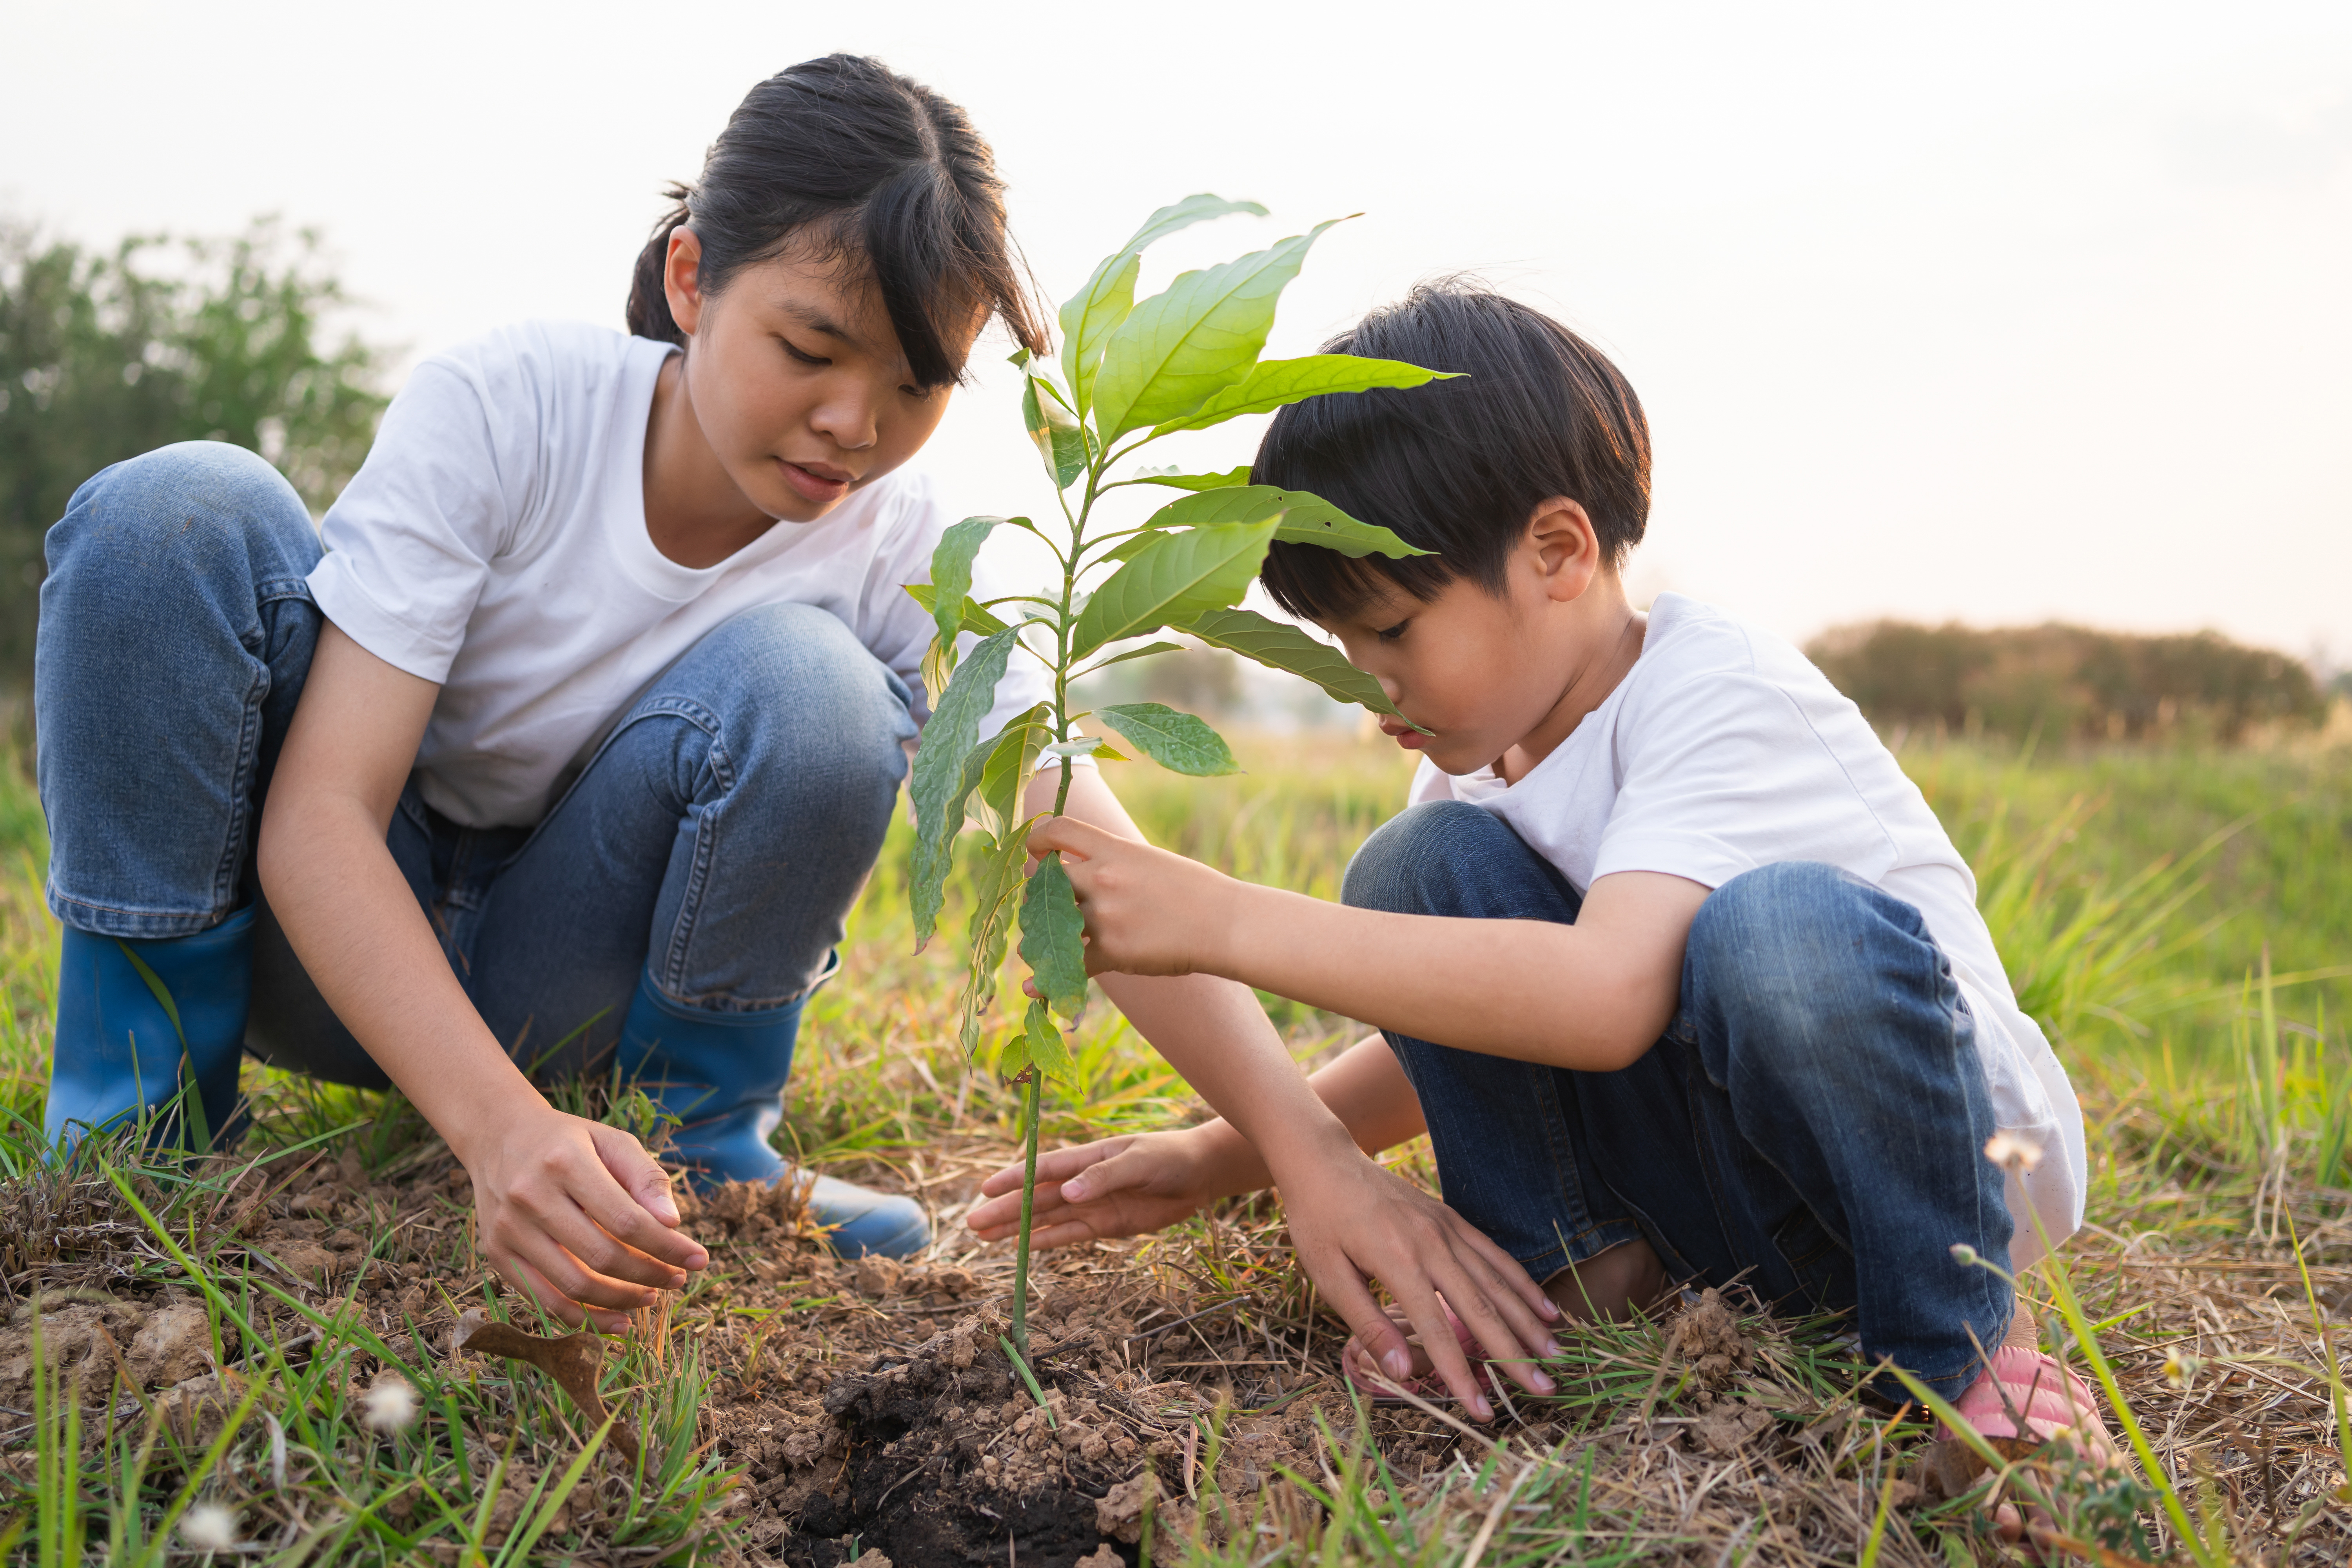 An older child and younger child kneel down and plant a tree together